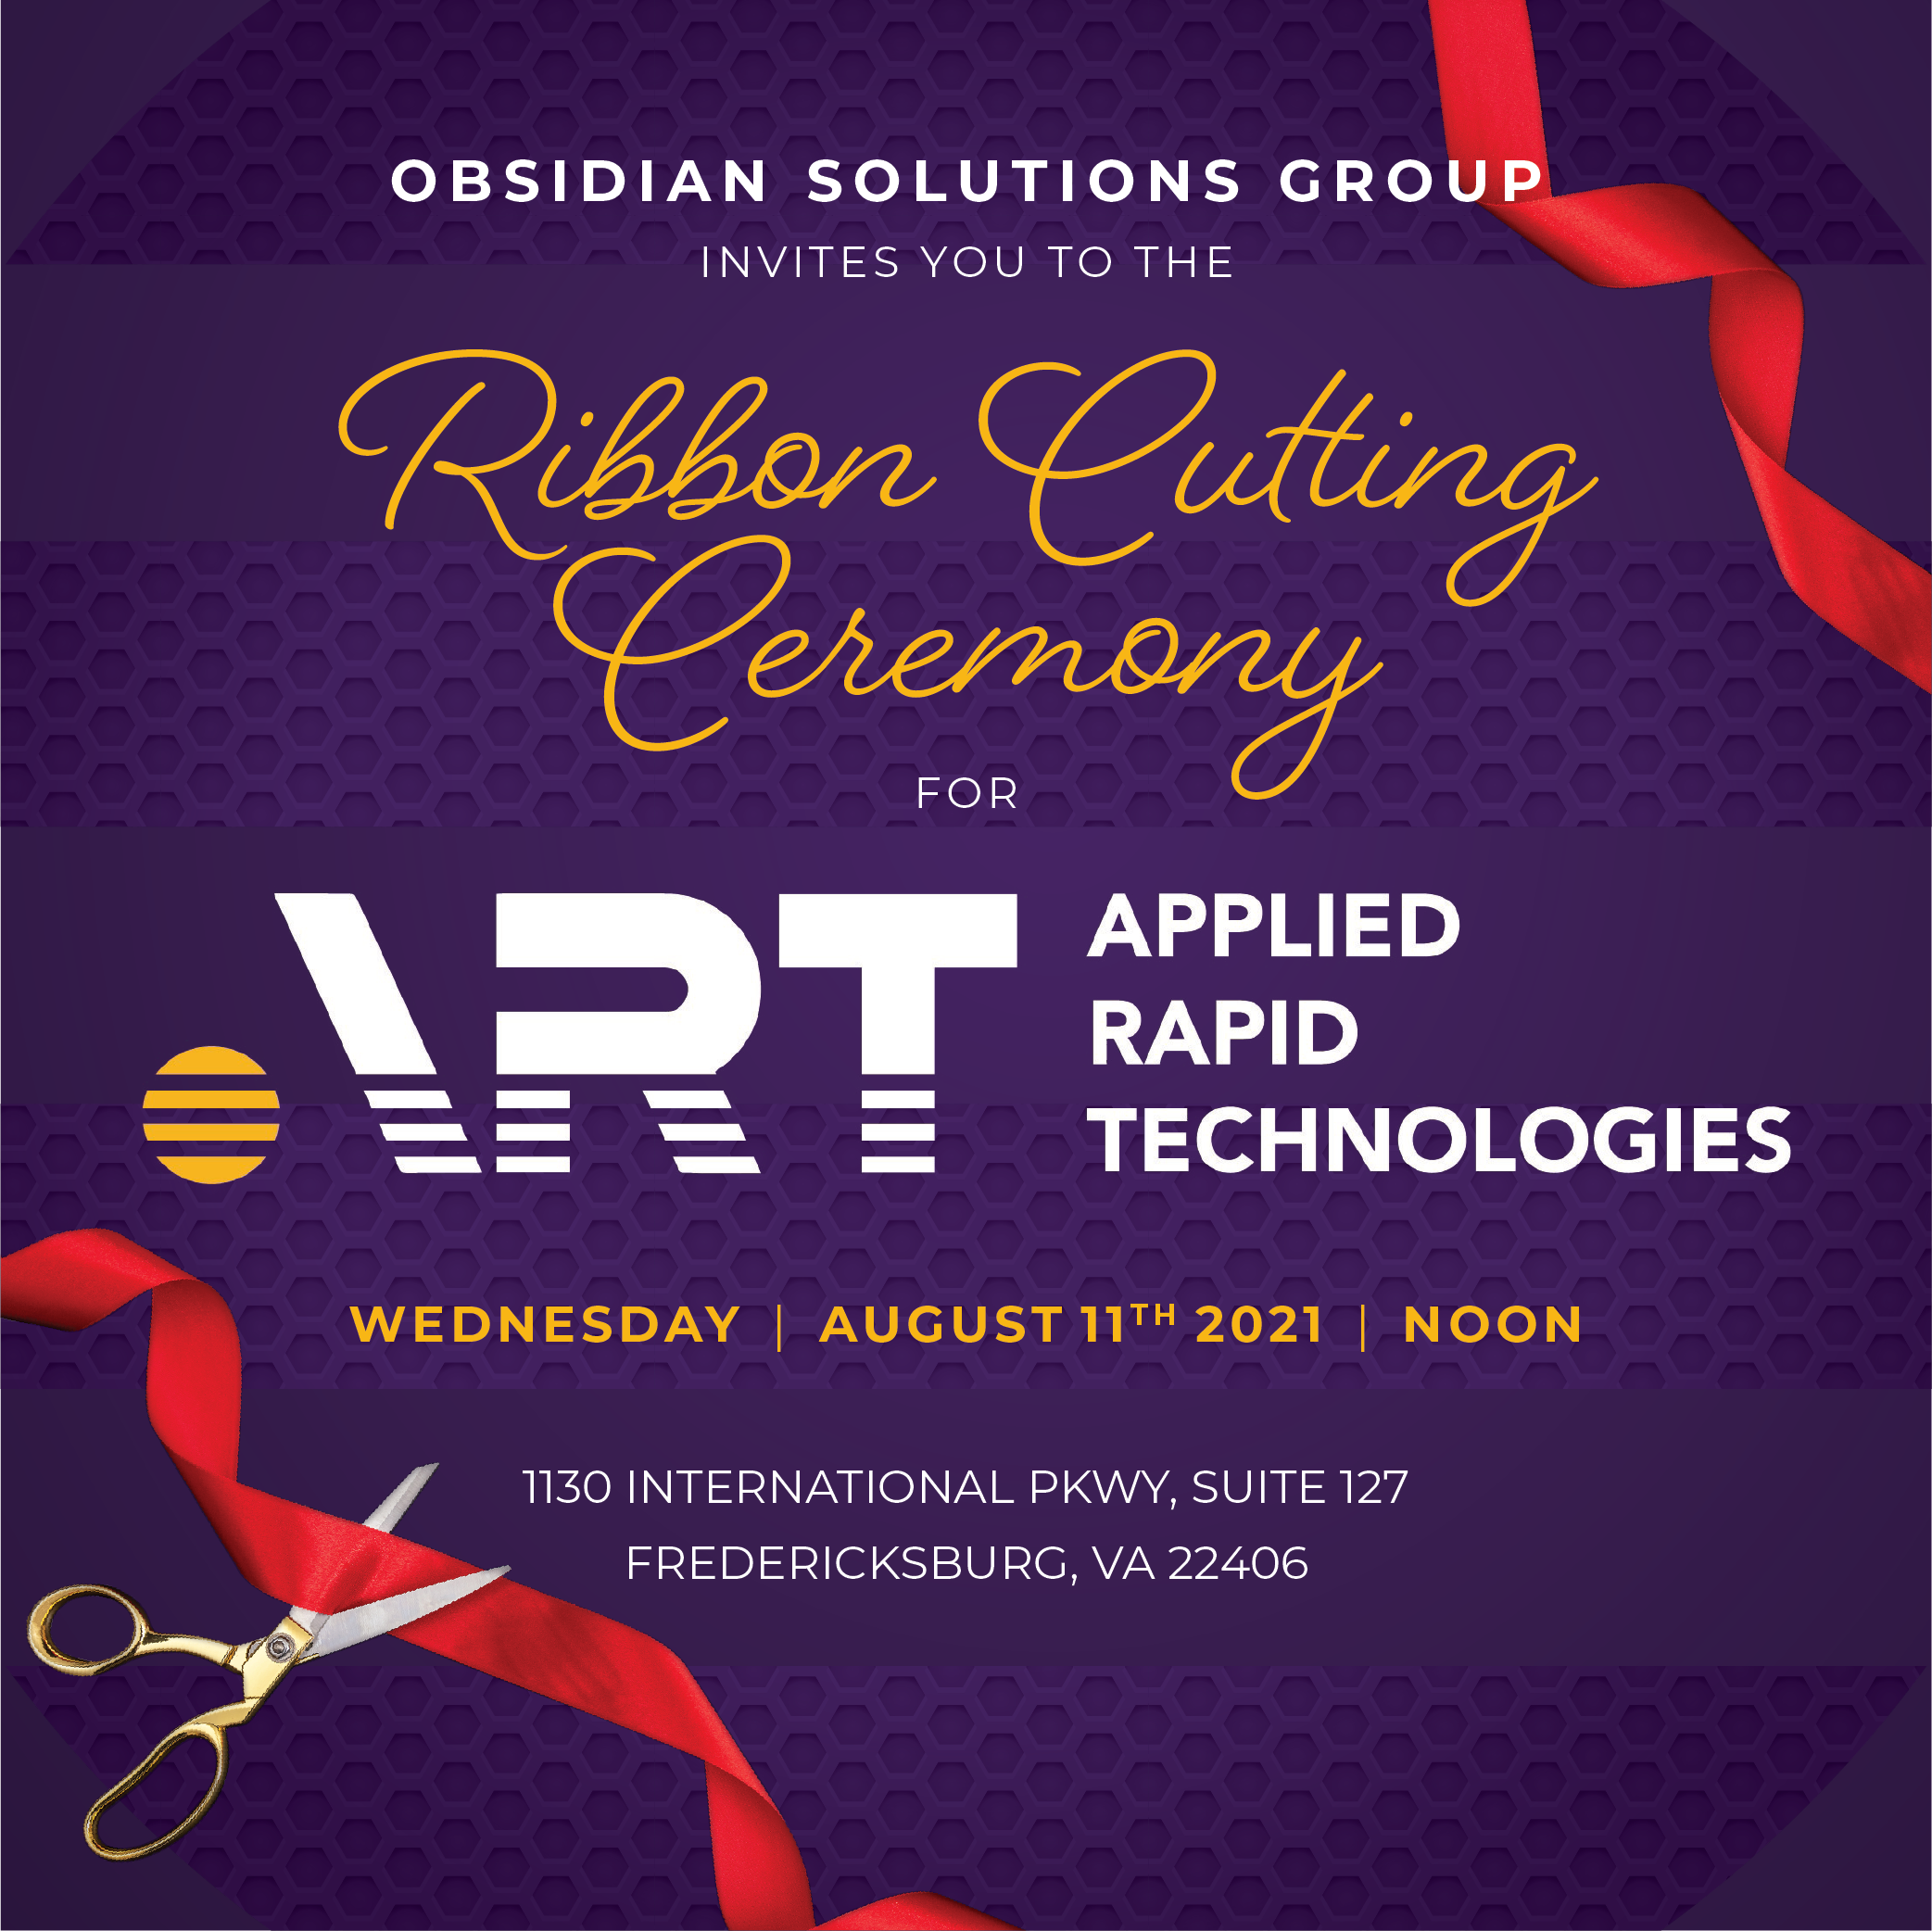 Obsidian Solutions Group, LLC Celebrates New Acquisition of Applied Rapid Technologies “ART” with Official Ribbon Cutting